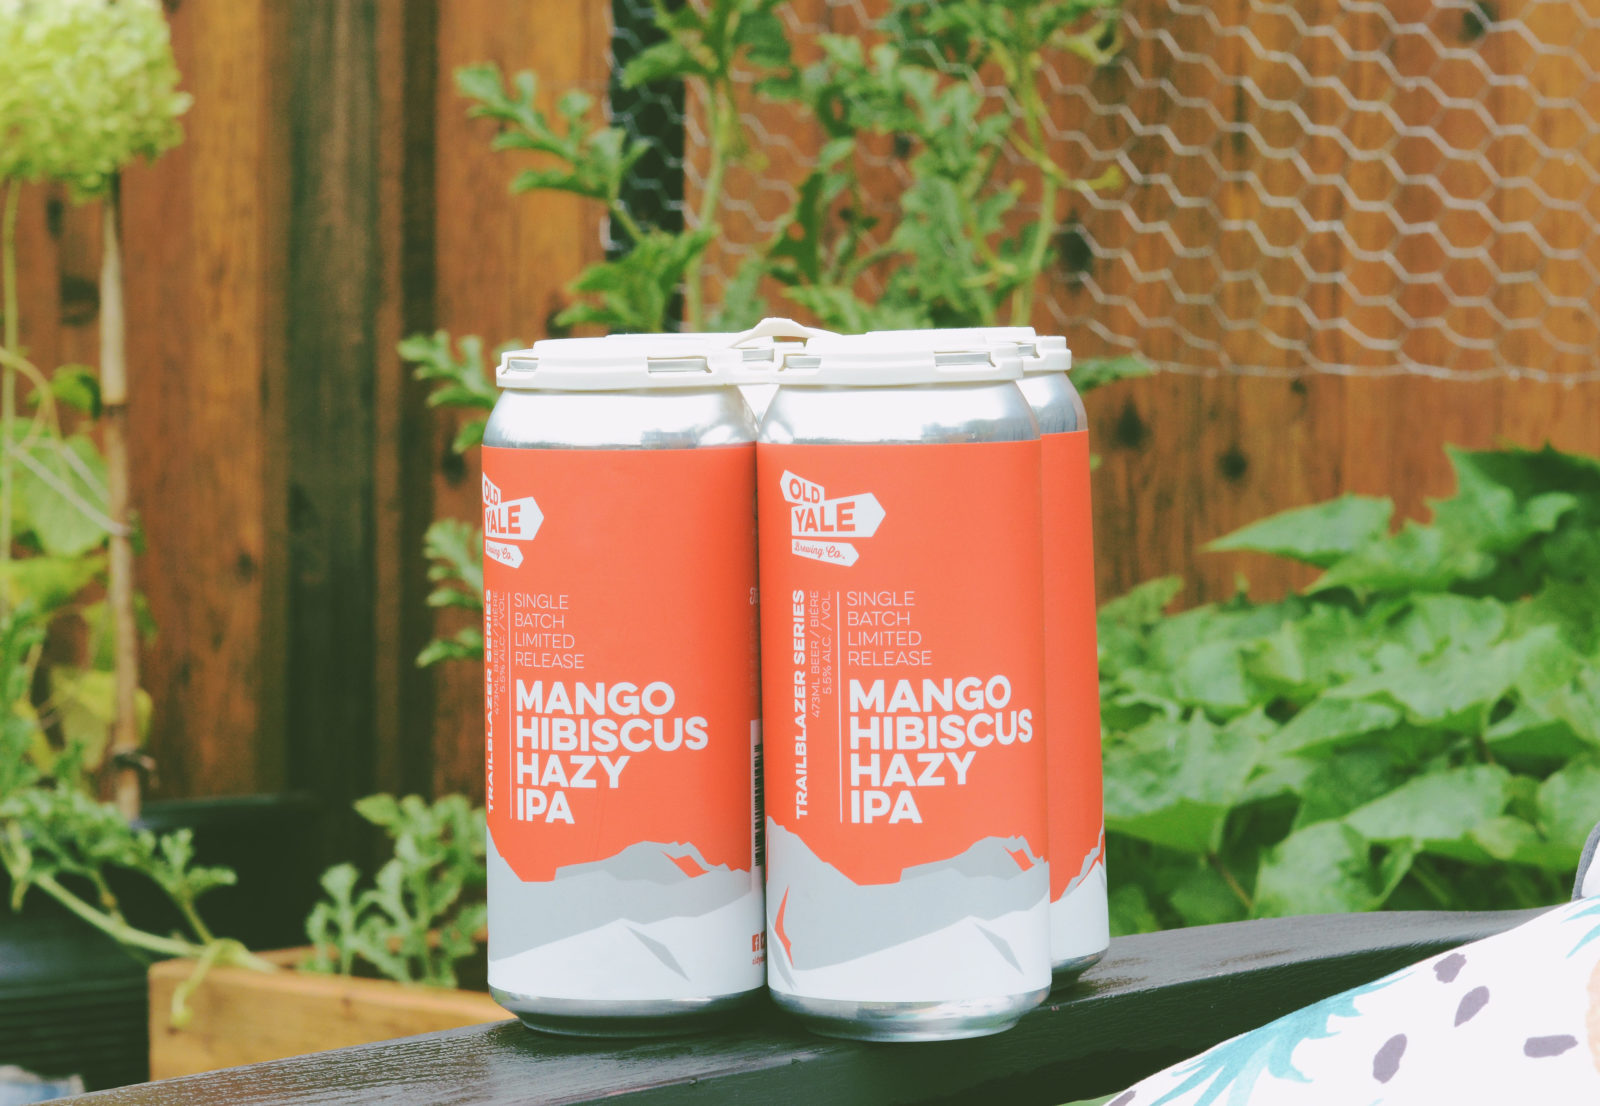 Mango Hibiscus Hazy IPA by Old Yale Brewing